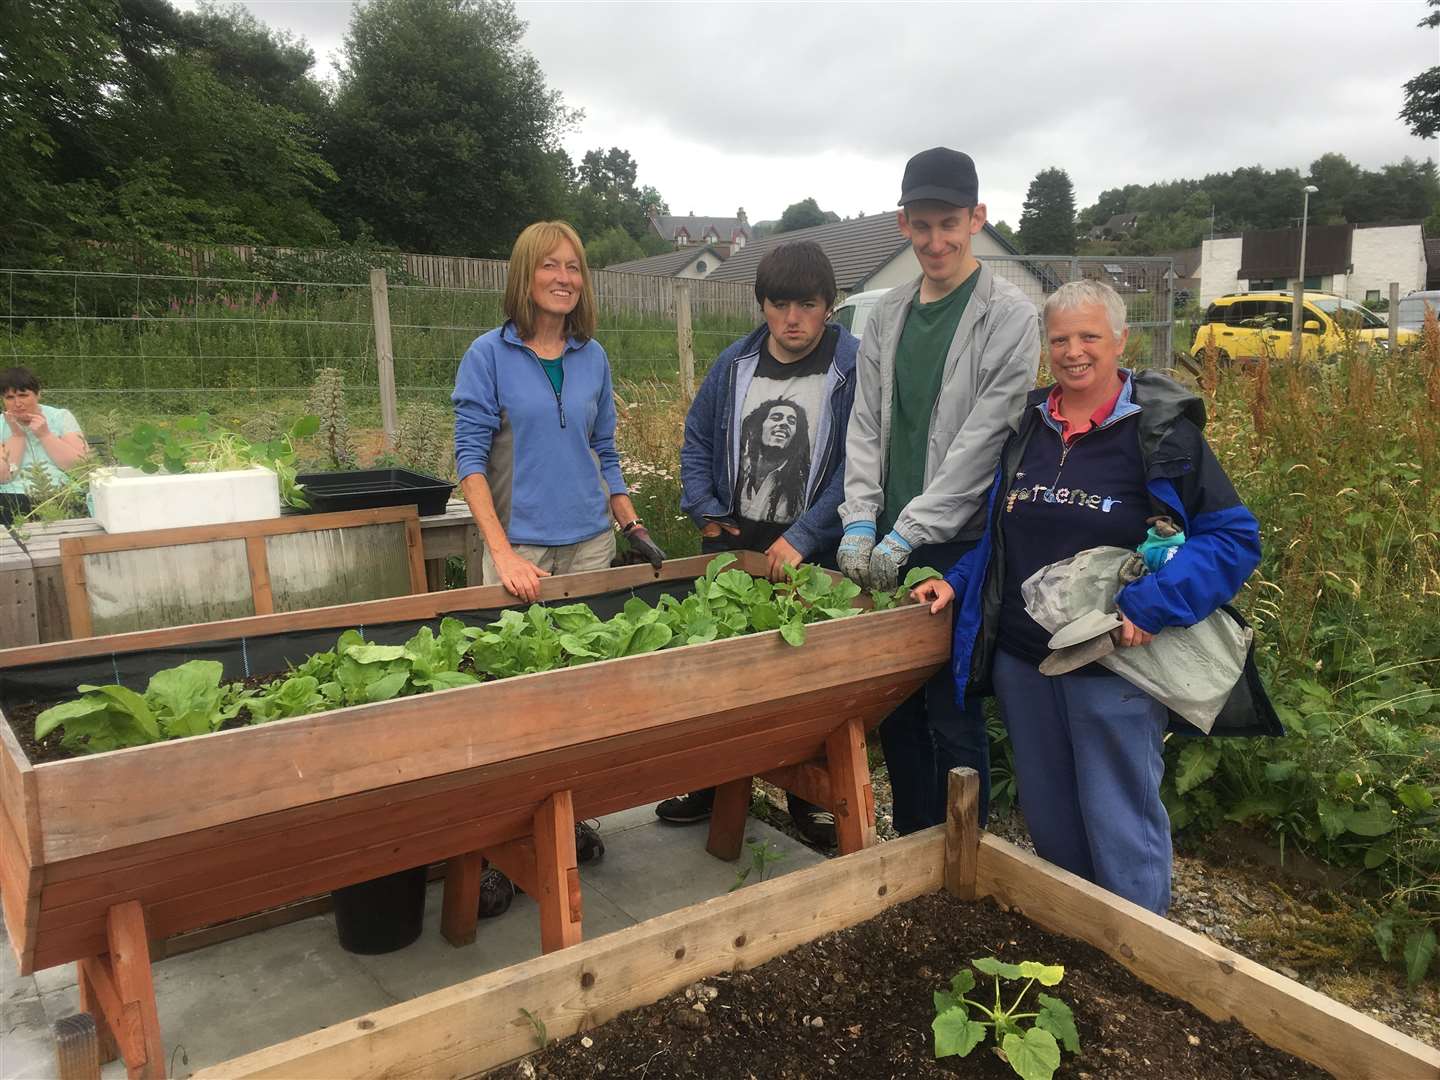 Therapy gardeners Laura Cannicott (project manager), Craig Macdonald, Ewan MacPhee and Gilly Kinnear.